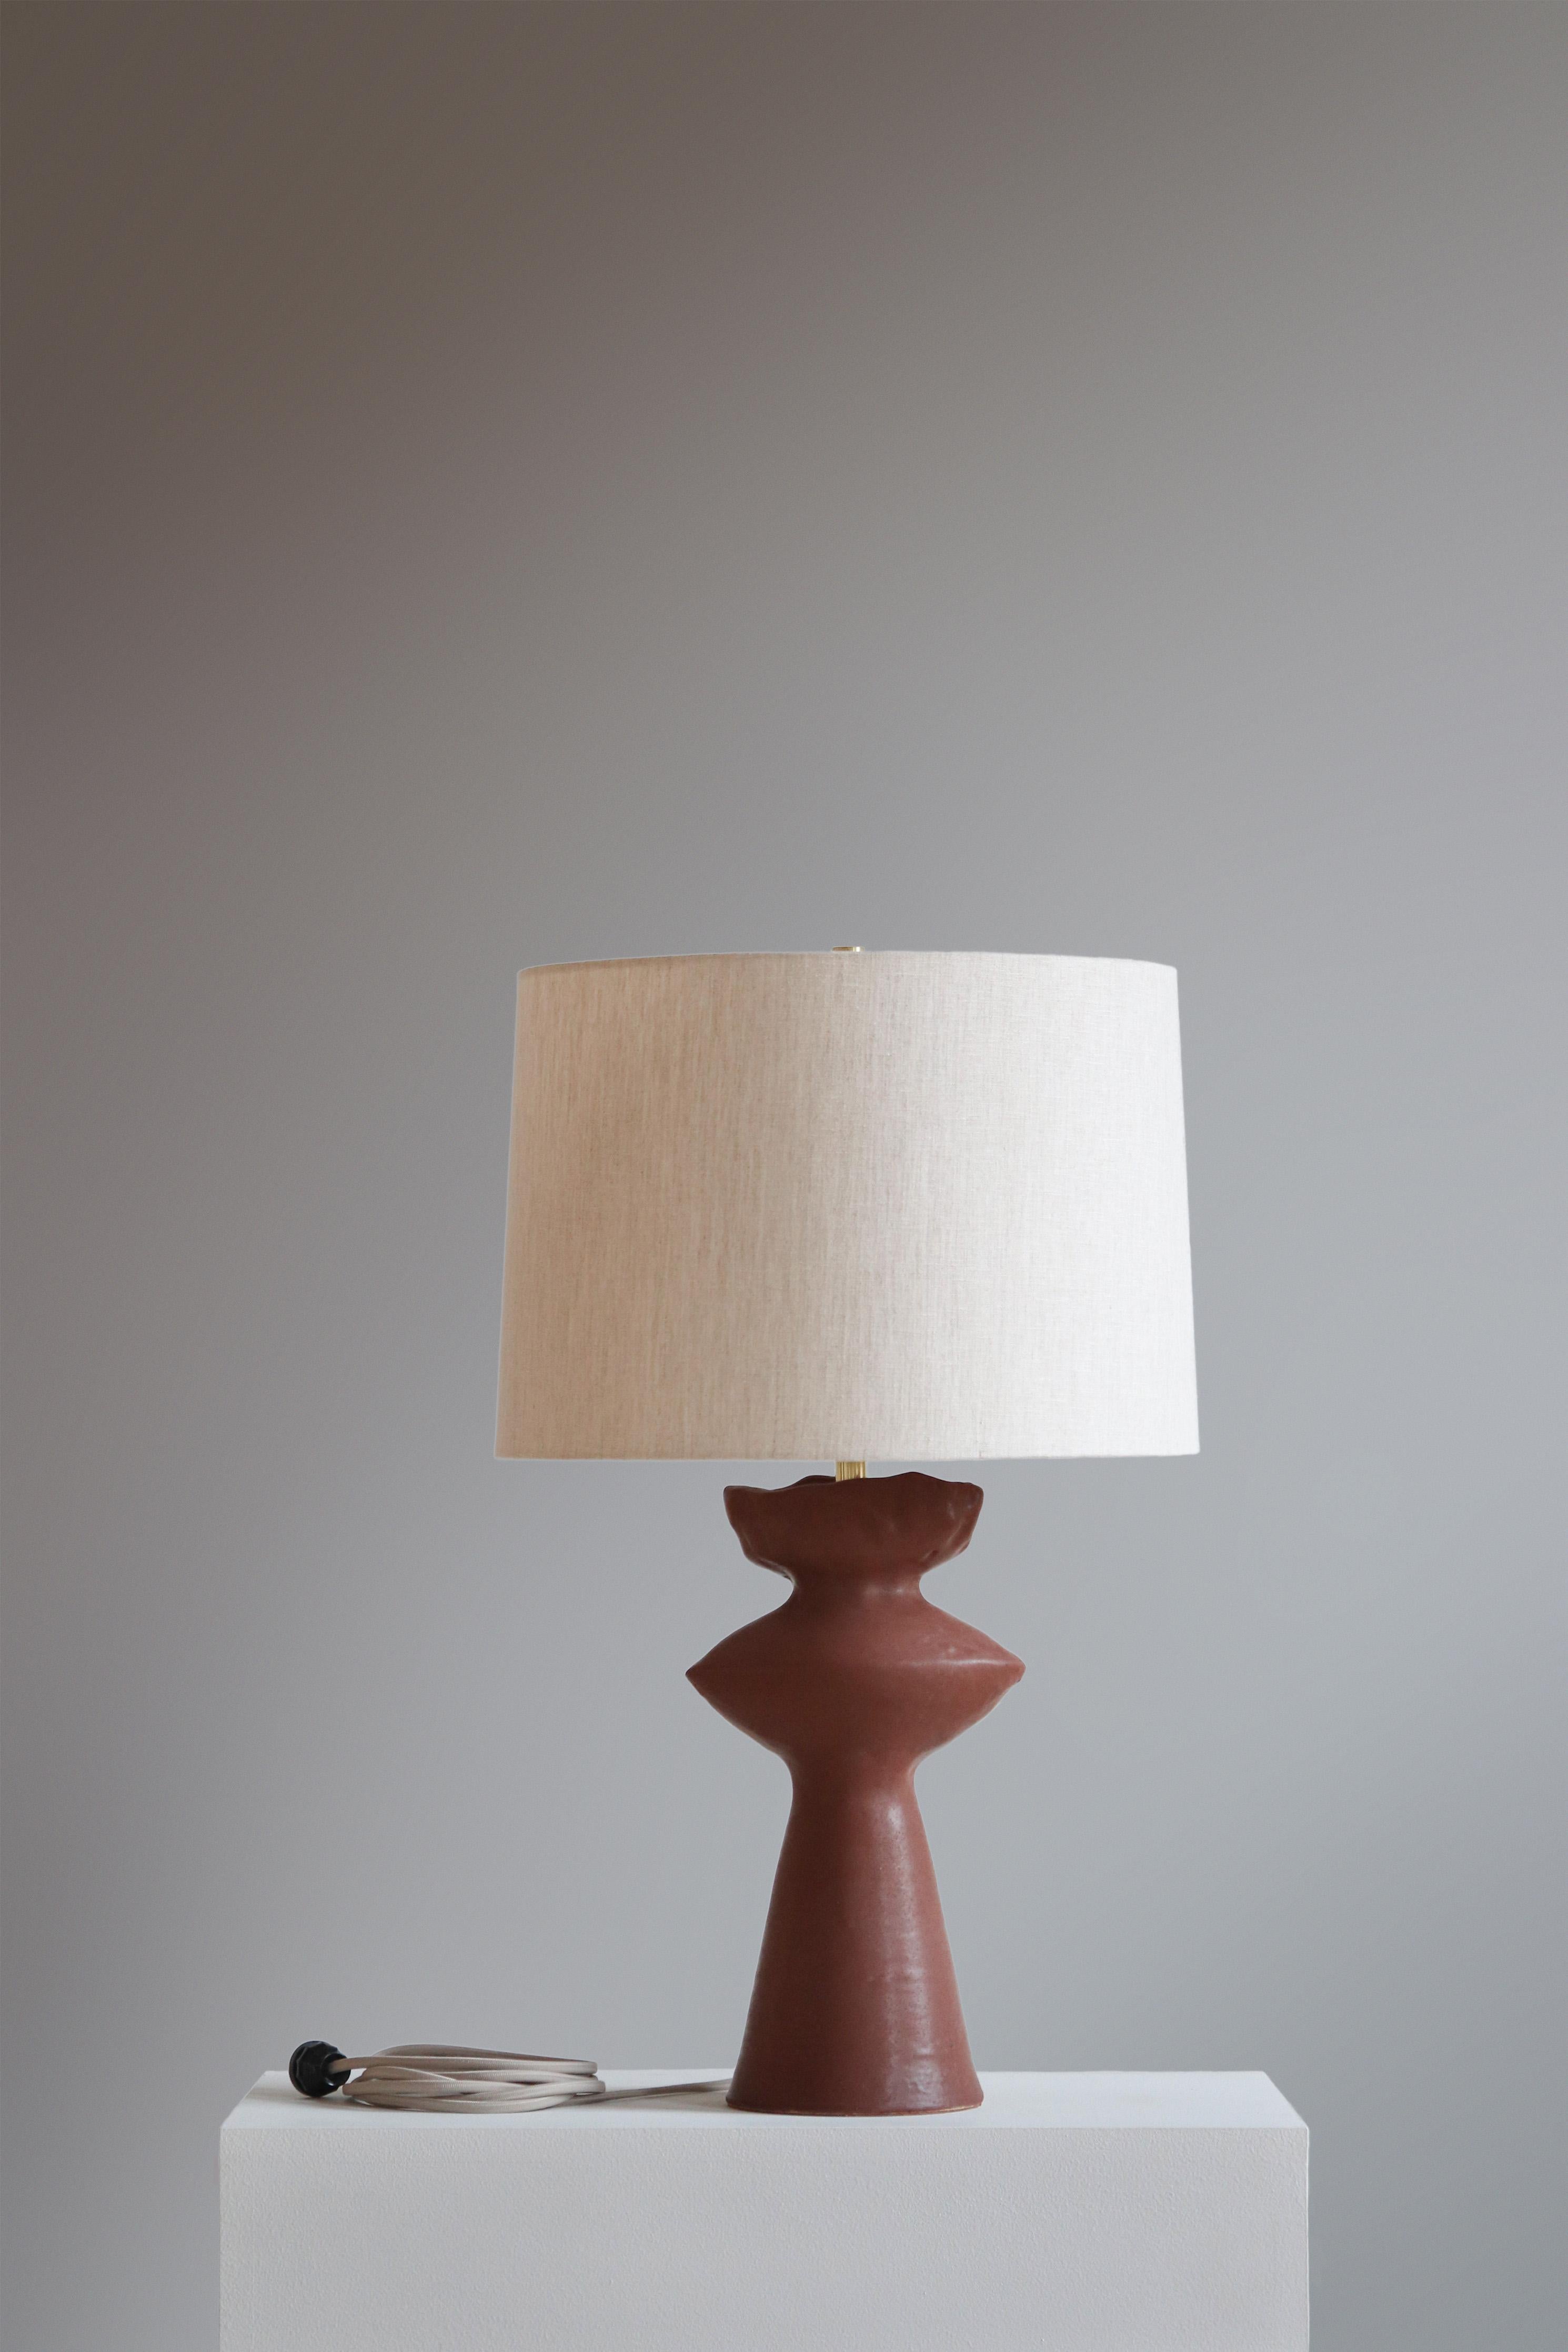 Chestnut Cicero 26 Table Lamp by Danny Kaplan Studio
Dimensions: ⌀ 41 x H 66 cm
Materials: Glazed Ceramic, Unfinished Brass, Linen

This item is handmade, and may exhibit variability within the same piece. We do our best to maintain a consistent